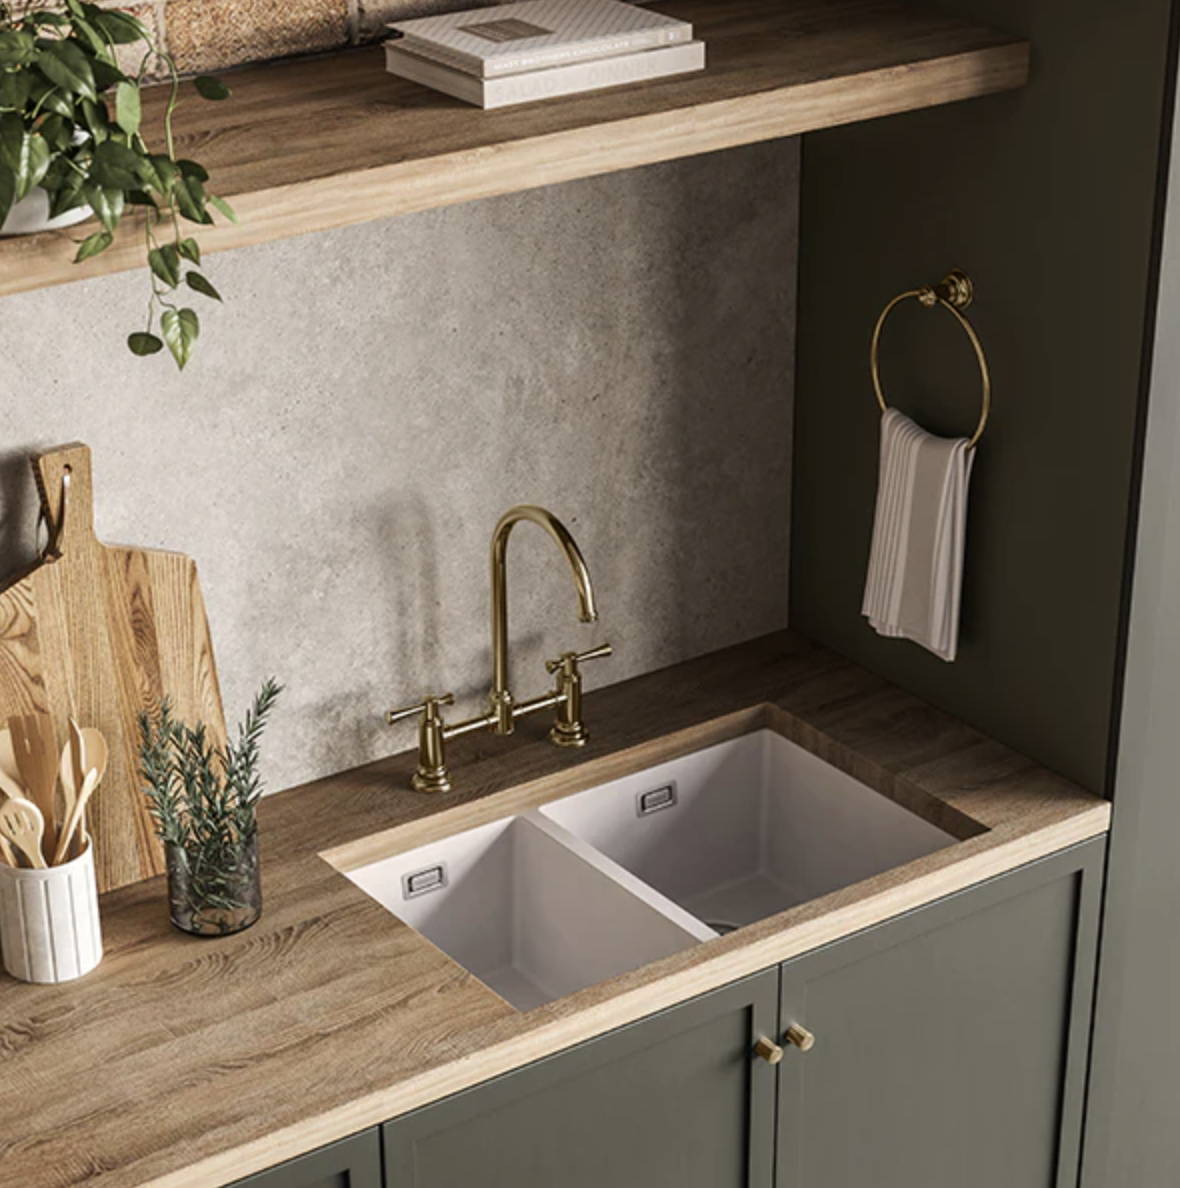 Modern white kitchen sink with sage kitchen cabinetry and traditional style tap ware  